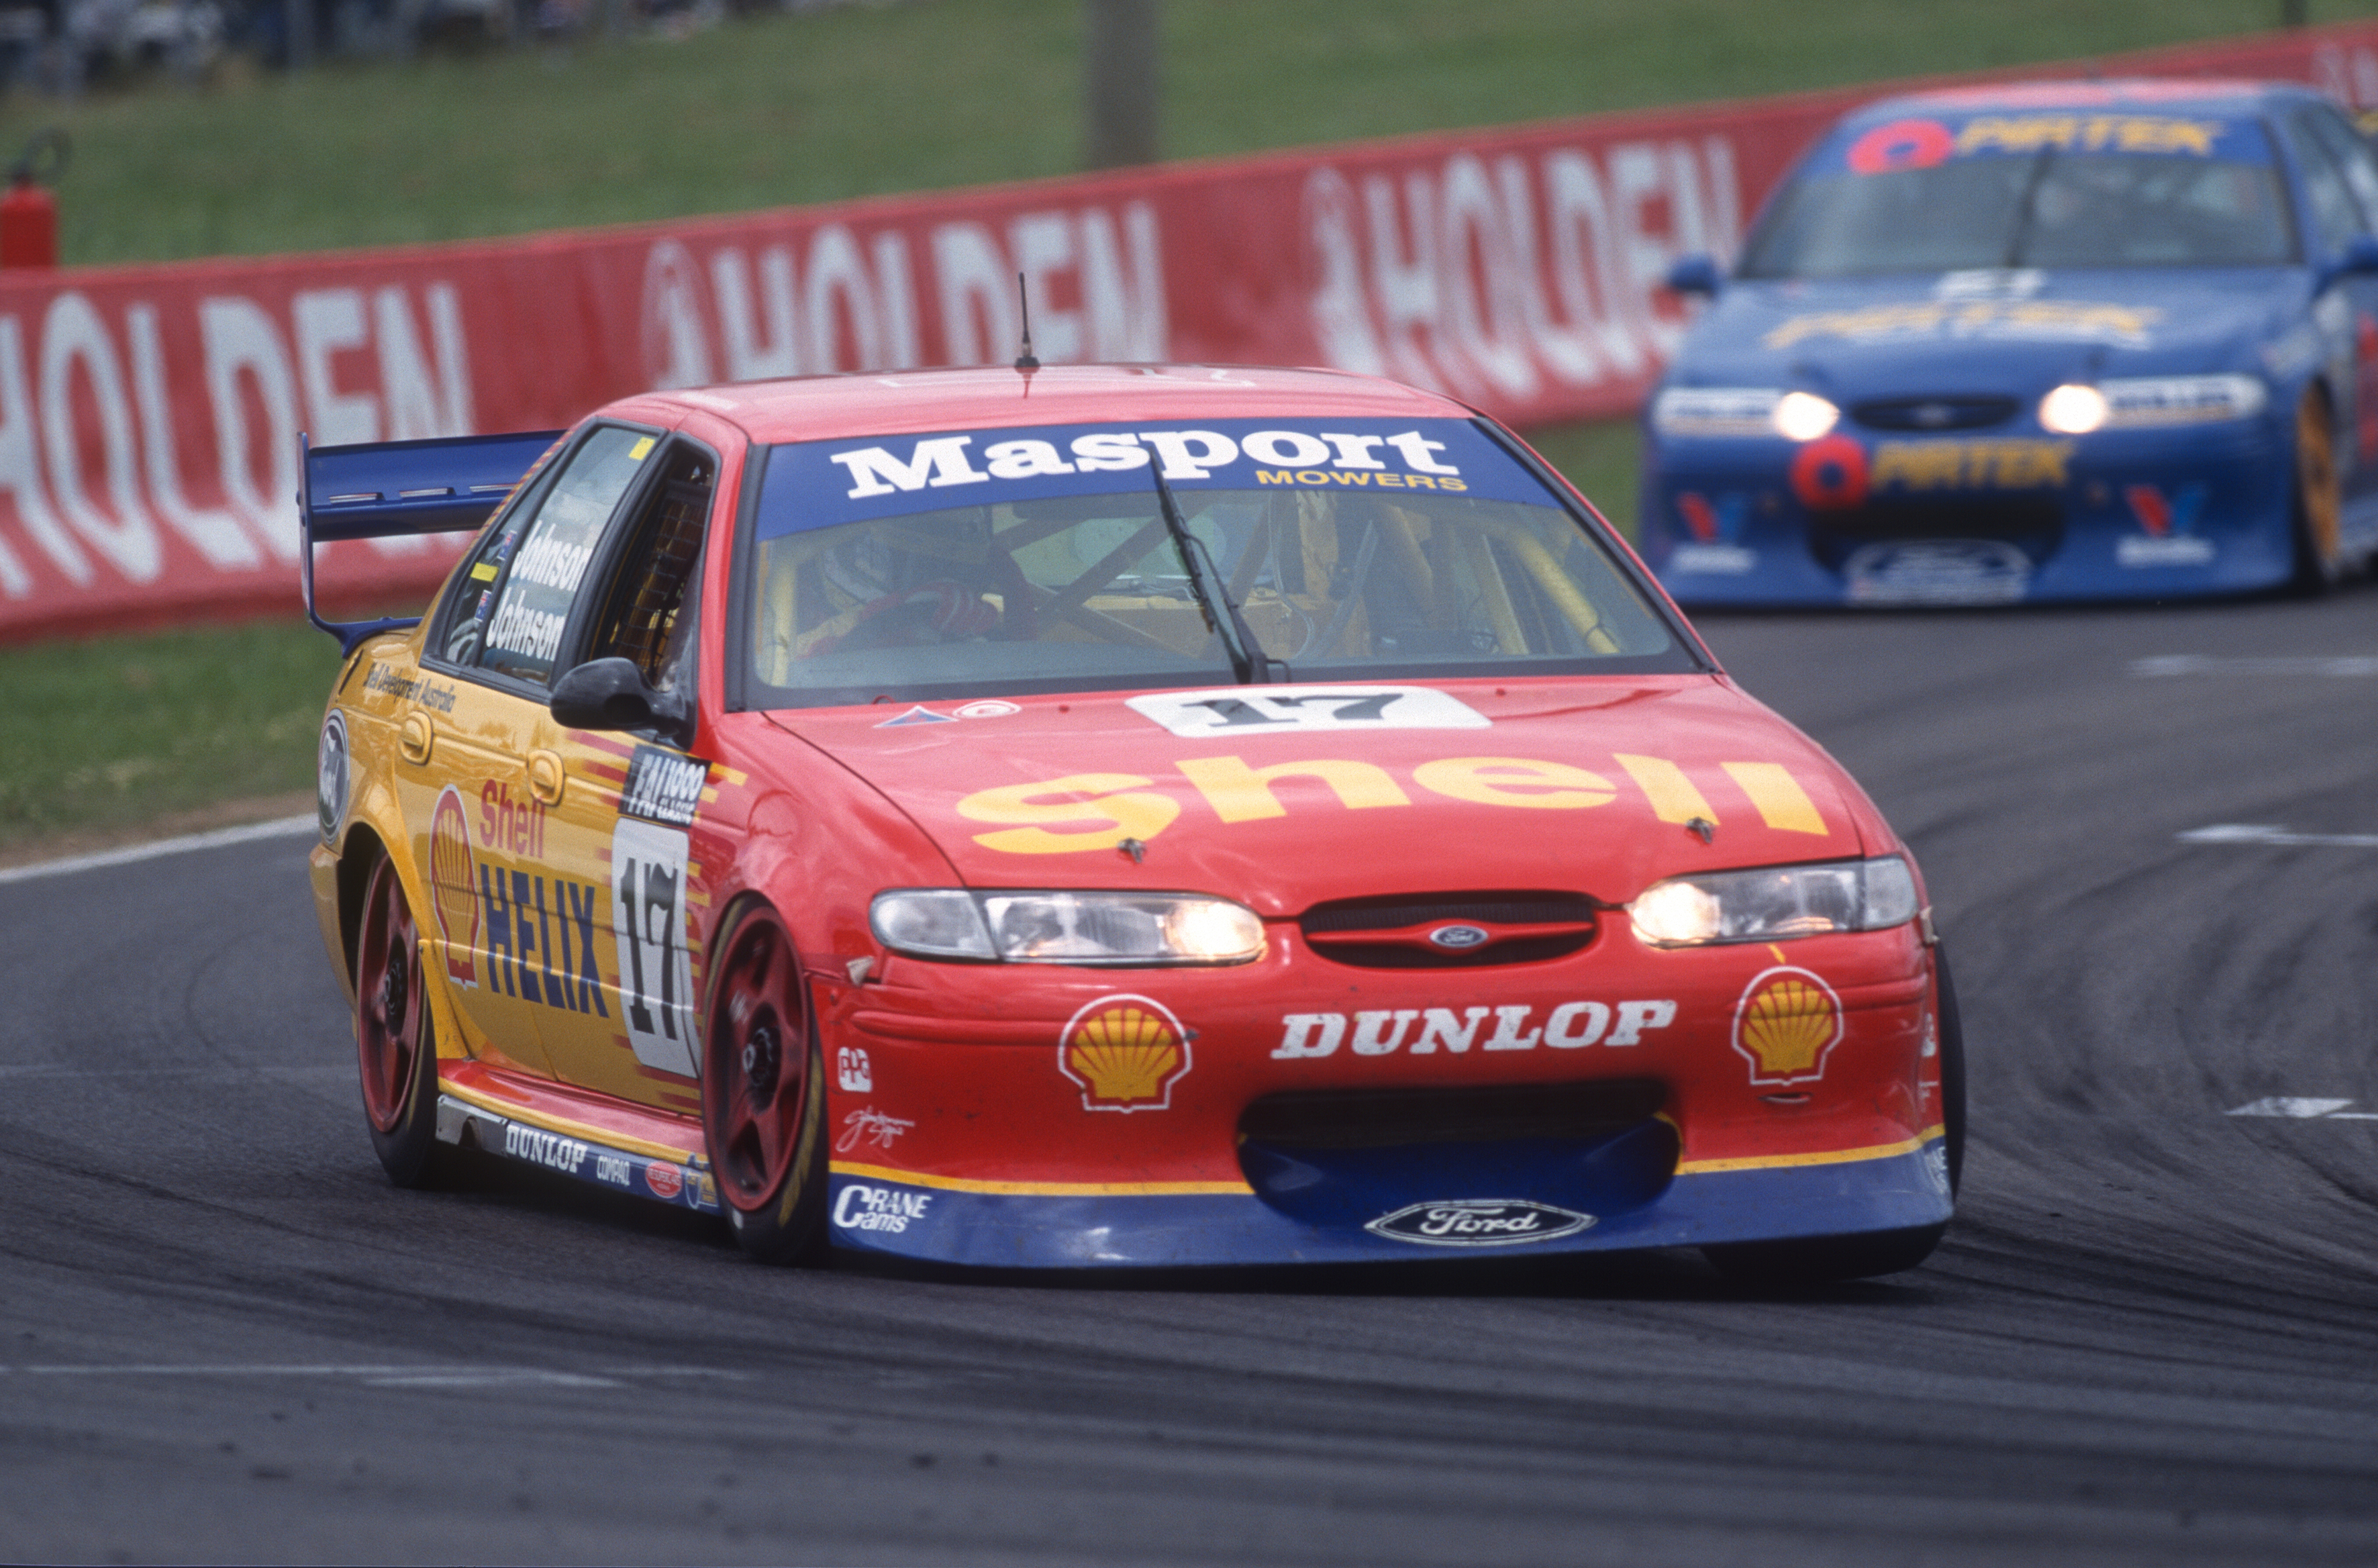 Dick Johnson Racing will run a commemorative livery at the Bathurst 1000, as the team prepares to take part in its 1000th Supercars/Australian Touring Car Championship race.